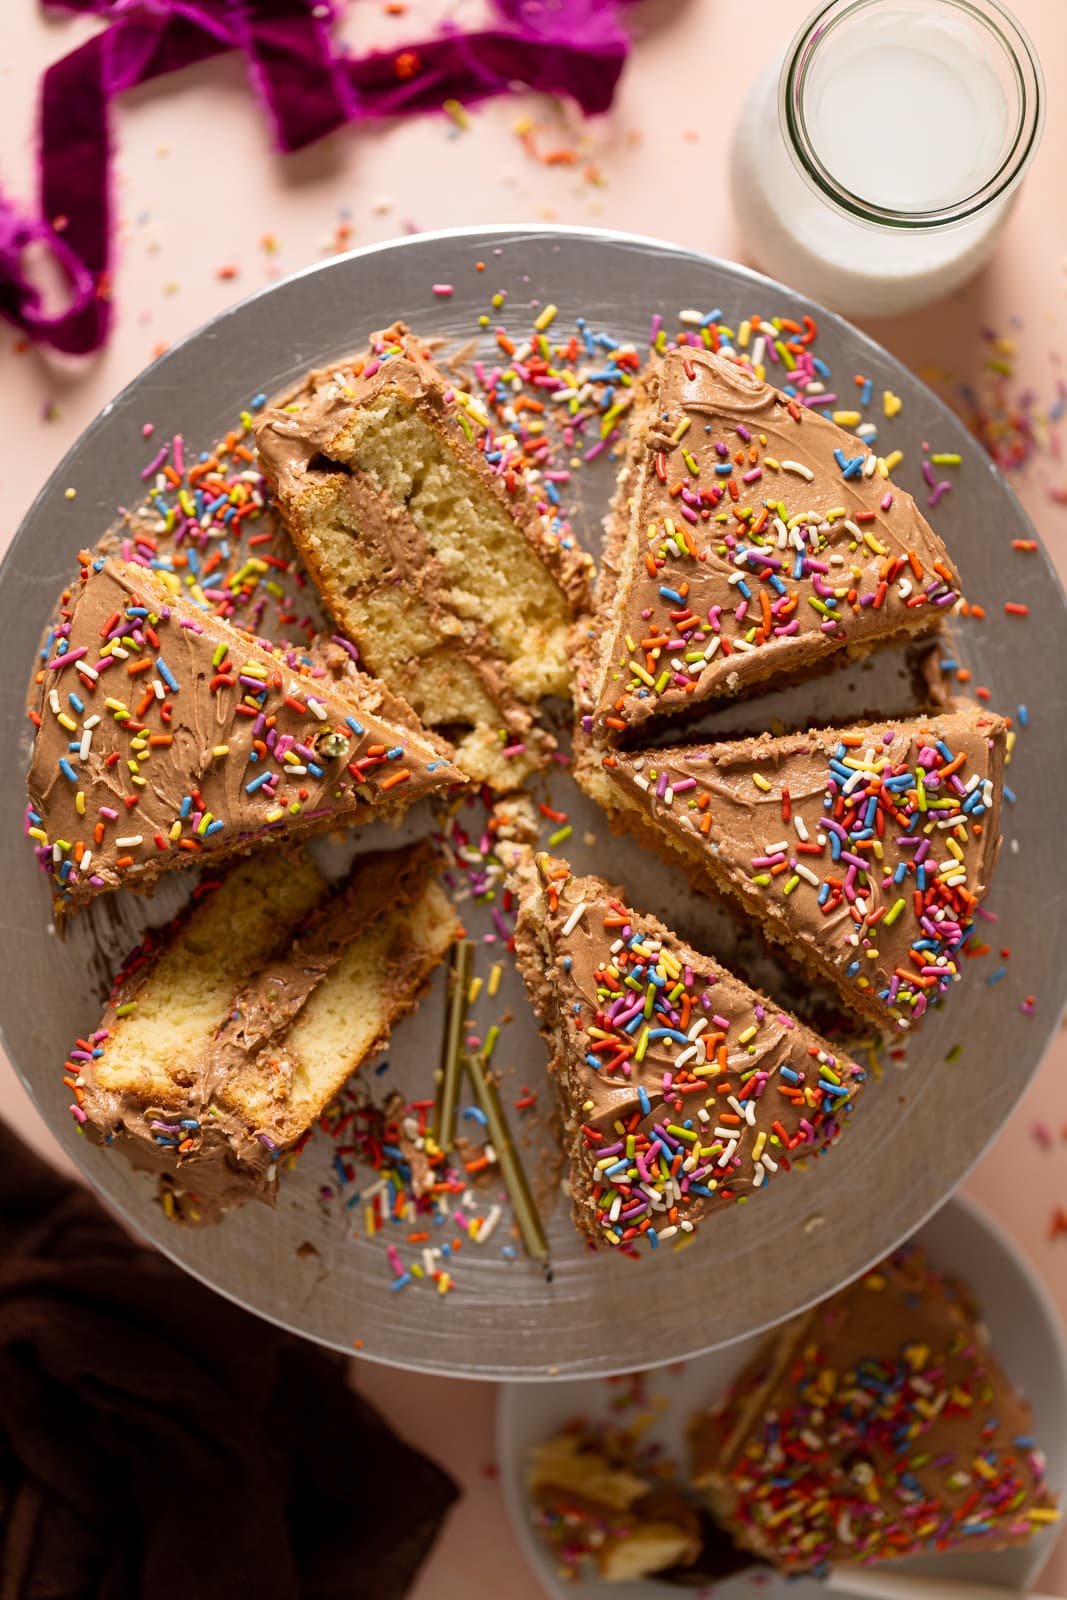 Overhead shot of a sliced Vanilla Birthday Cake with Chocolate Frosting